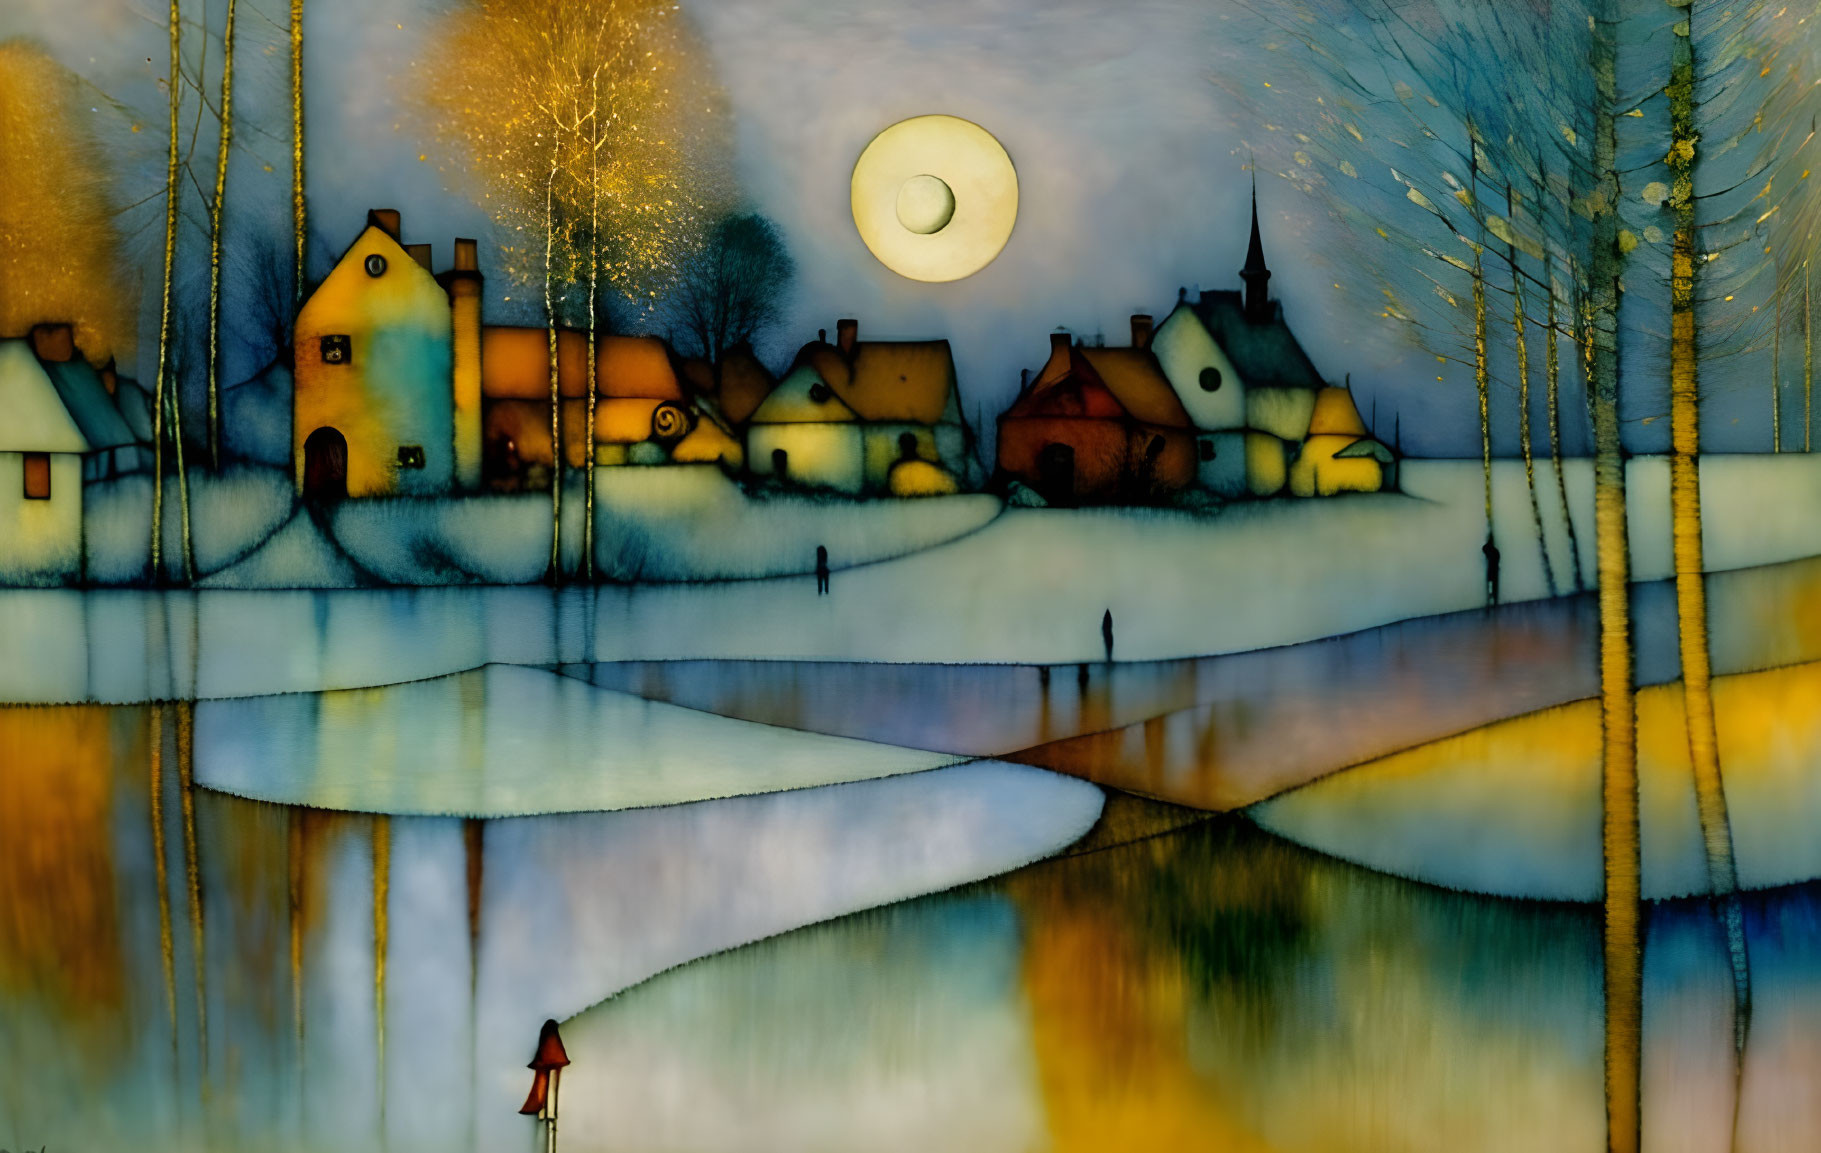 Tranquil village painting with reflective water, bare trees, glowing moon, and figure in red